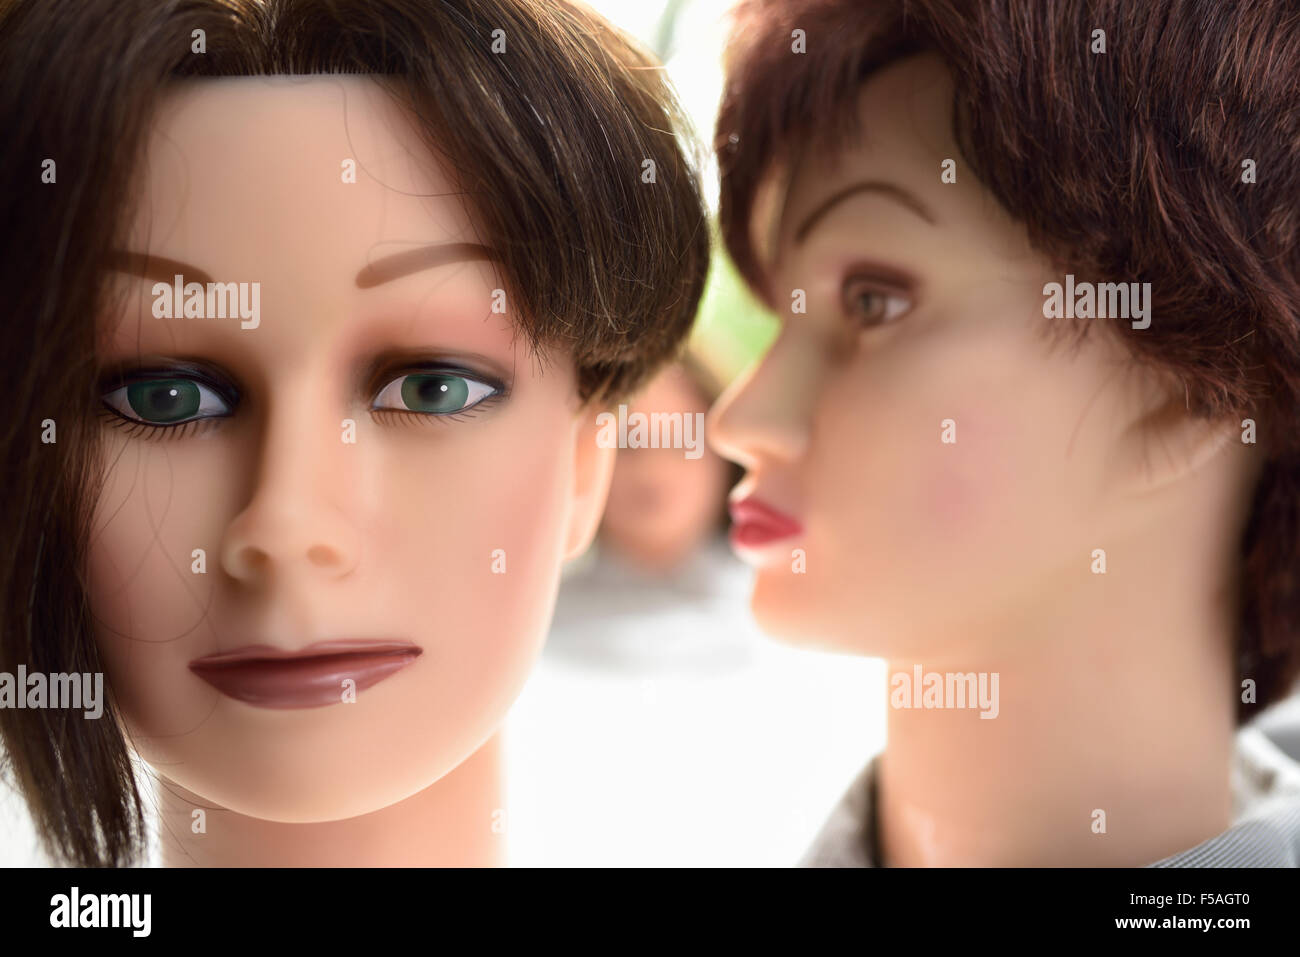 Female mannequin heads showing whispering a secret Stock Photo